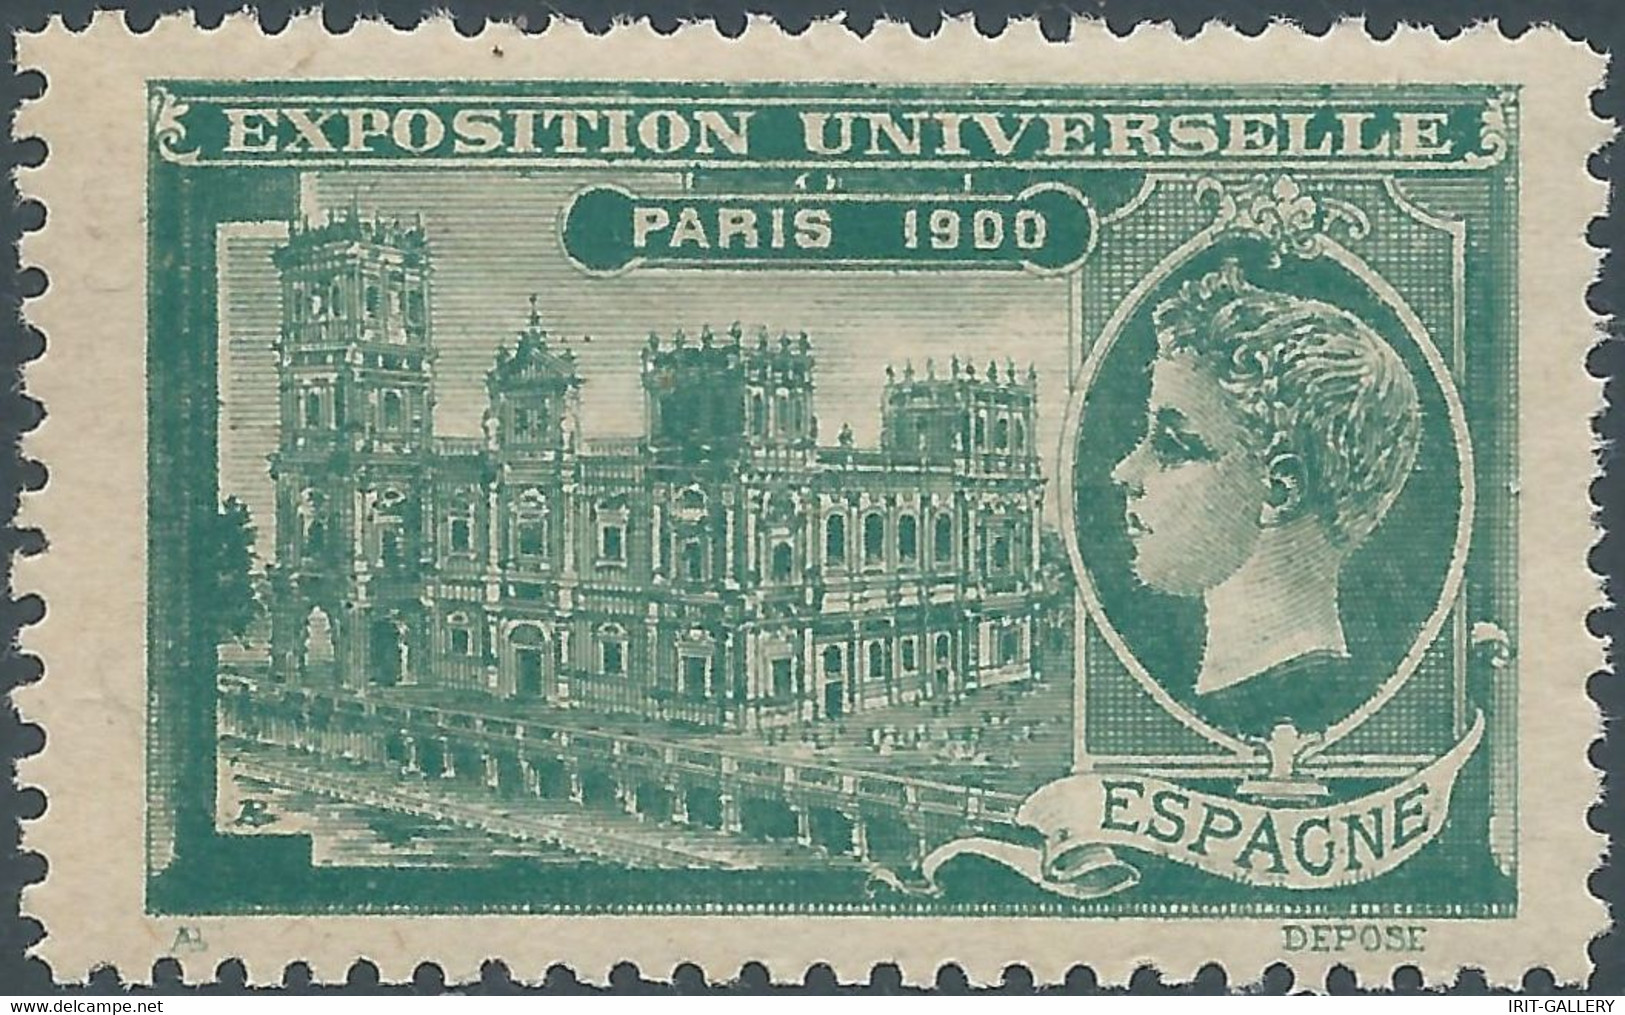 France,Paris 1900 UNIVERSAL EXHIBITION OF Spagne - Spain ,Trace Of Hinged - 1900 – París (Francia)